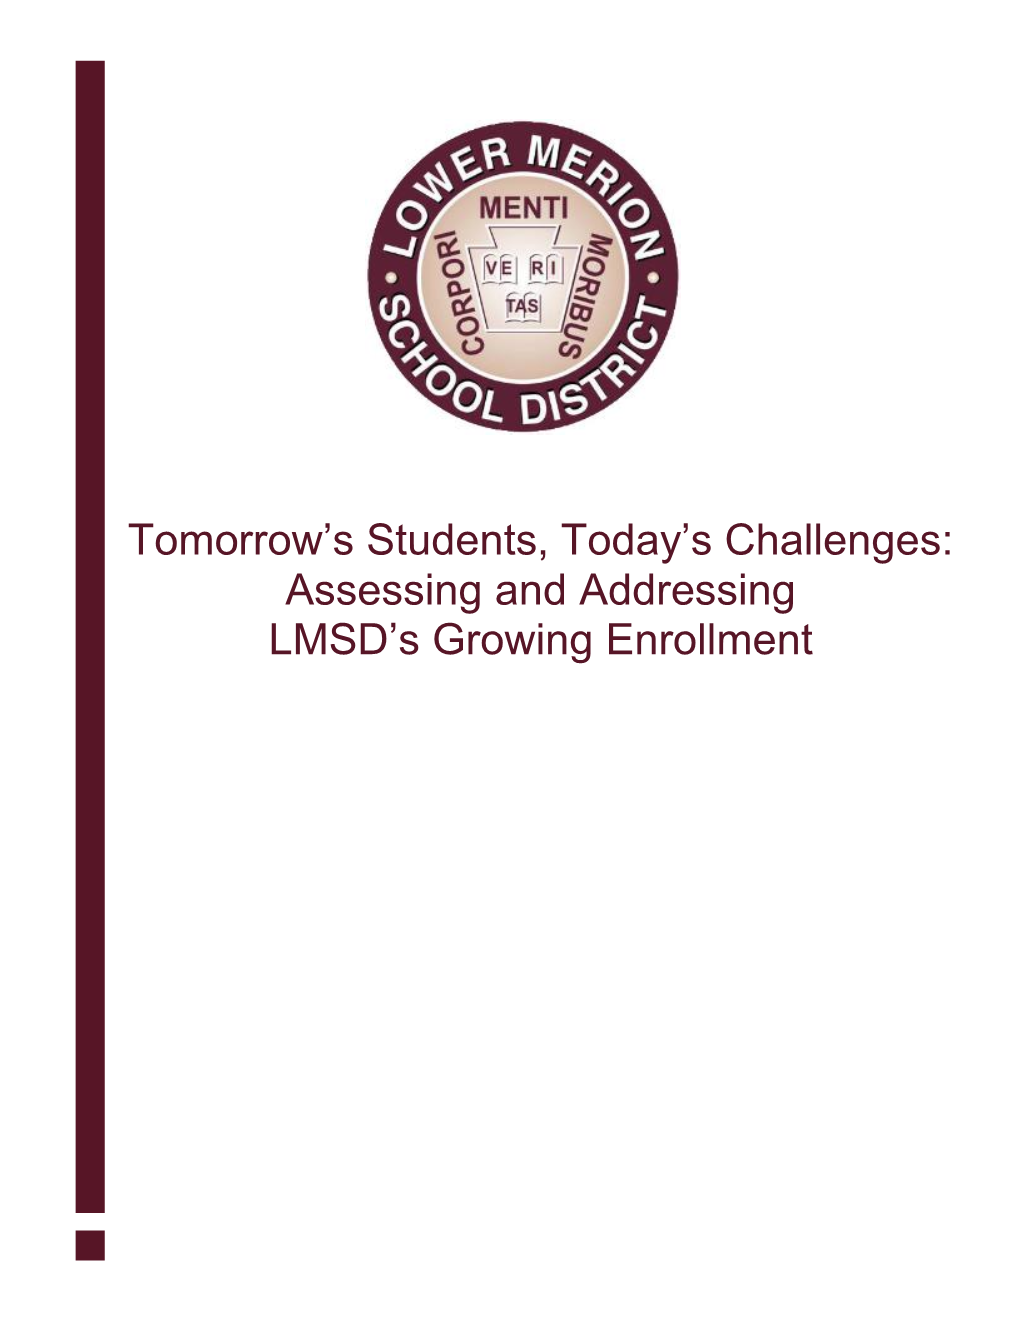 Assessing and Addressing LMSD's Growing Enrollment